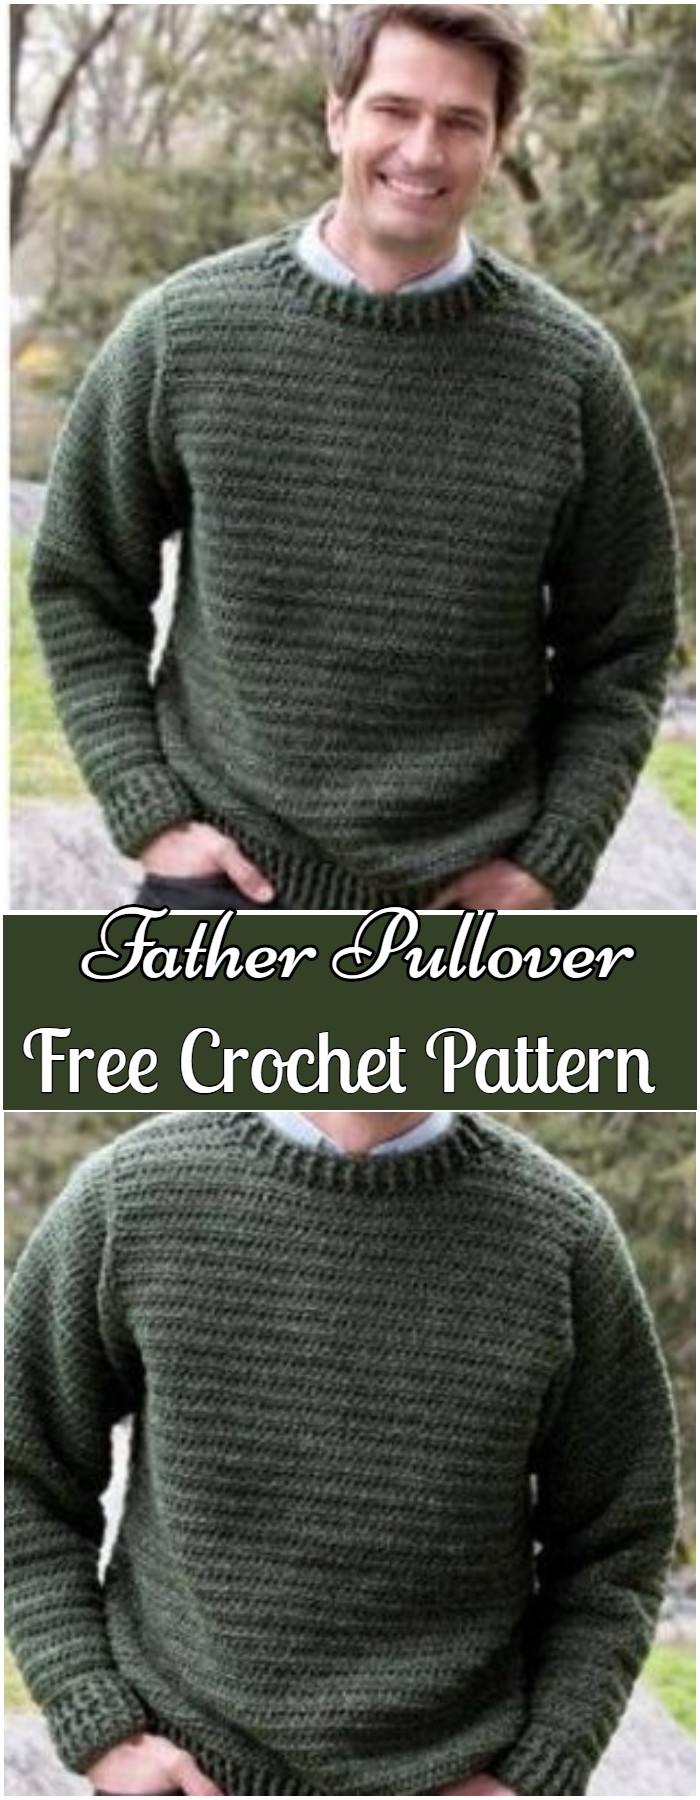 Crochet Father Pullover